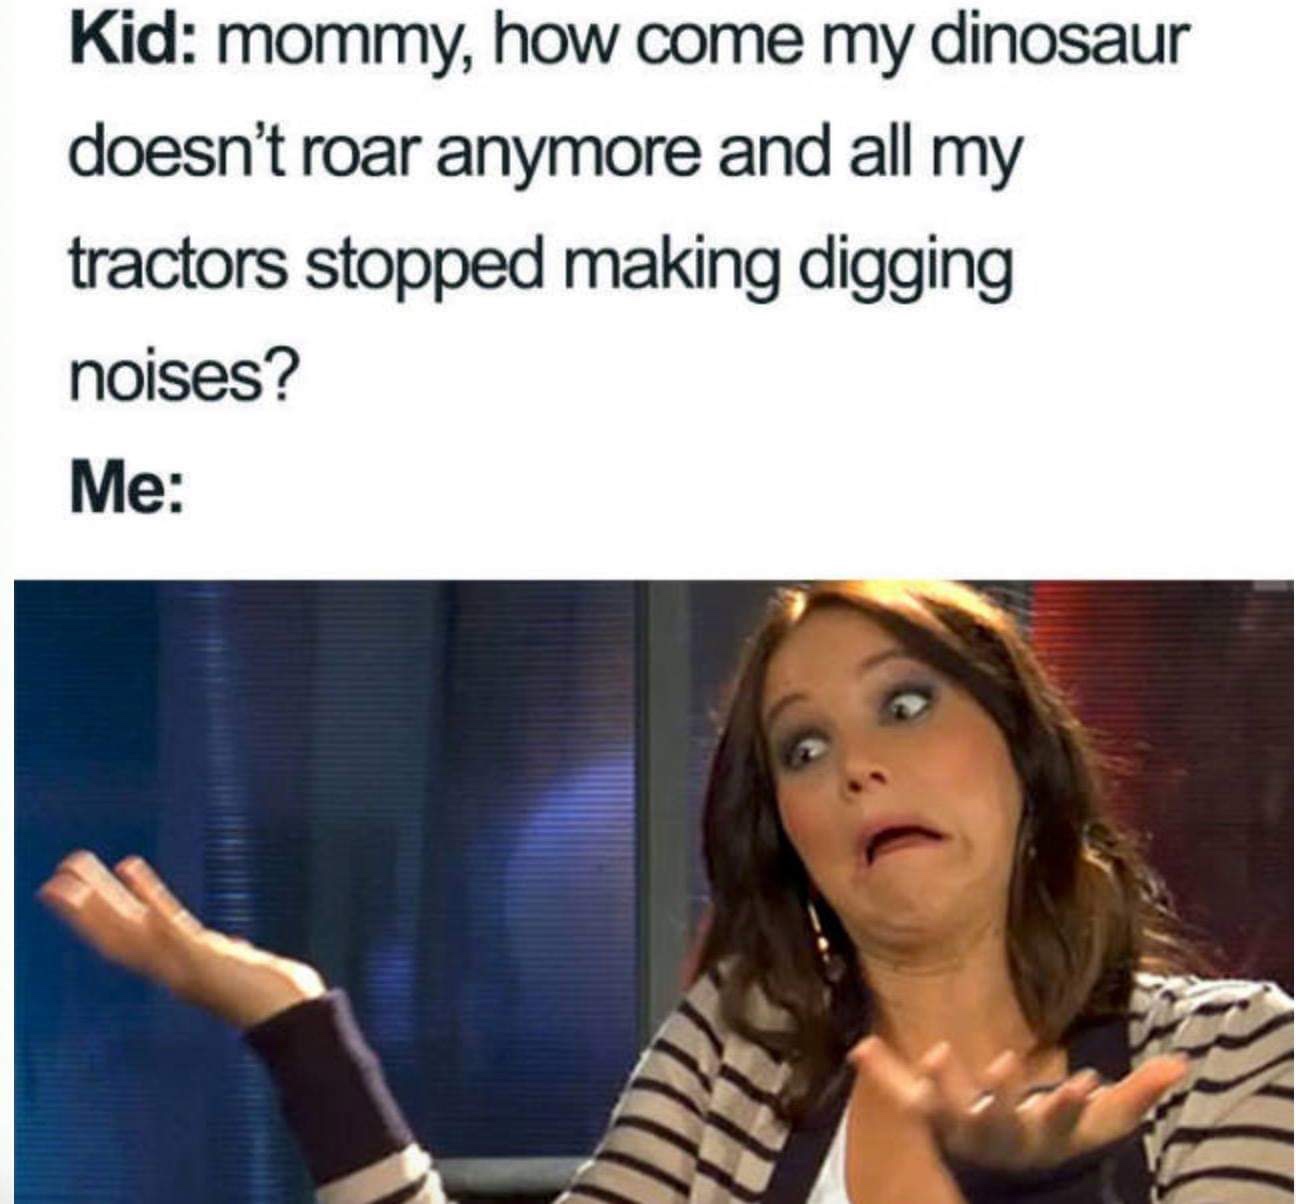 parent memes - Kid mommy, how come my dinosaur doesn't roar anymore and all my tractors stopped making digging noises? Me